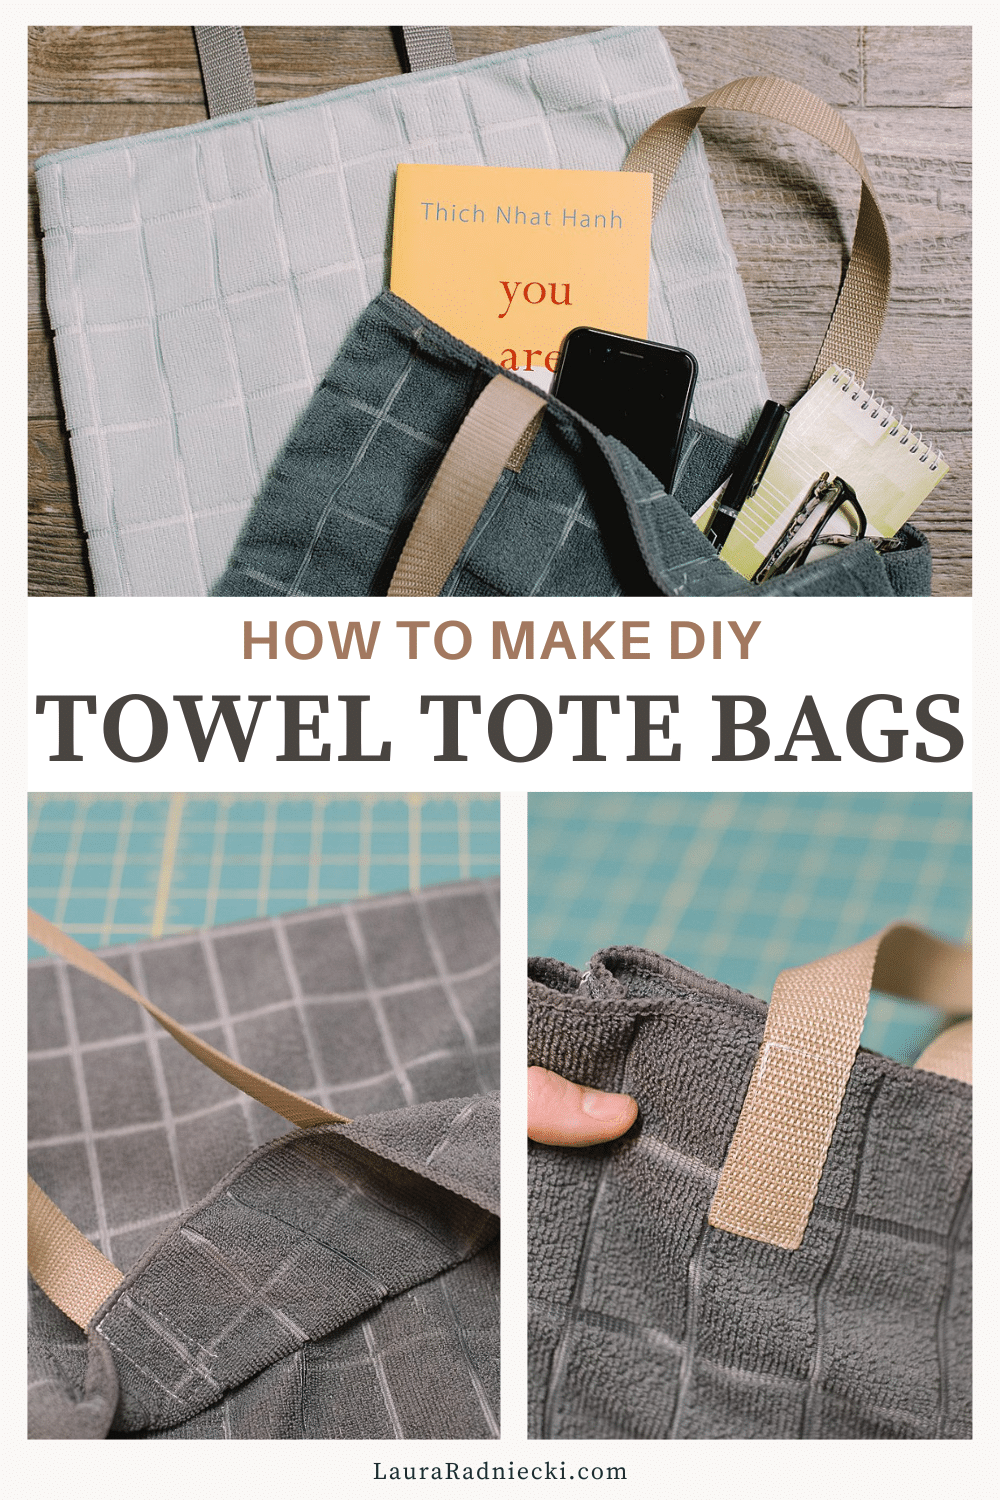 How to Make Tote Bags from Hand Towels